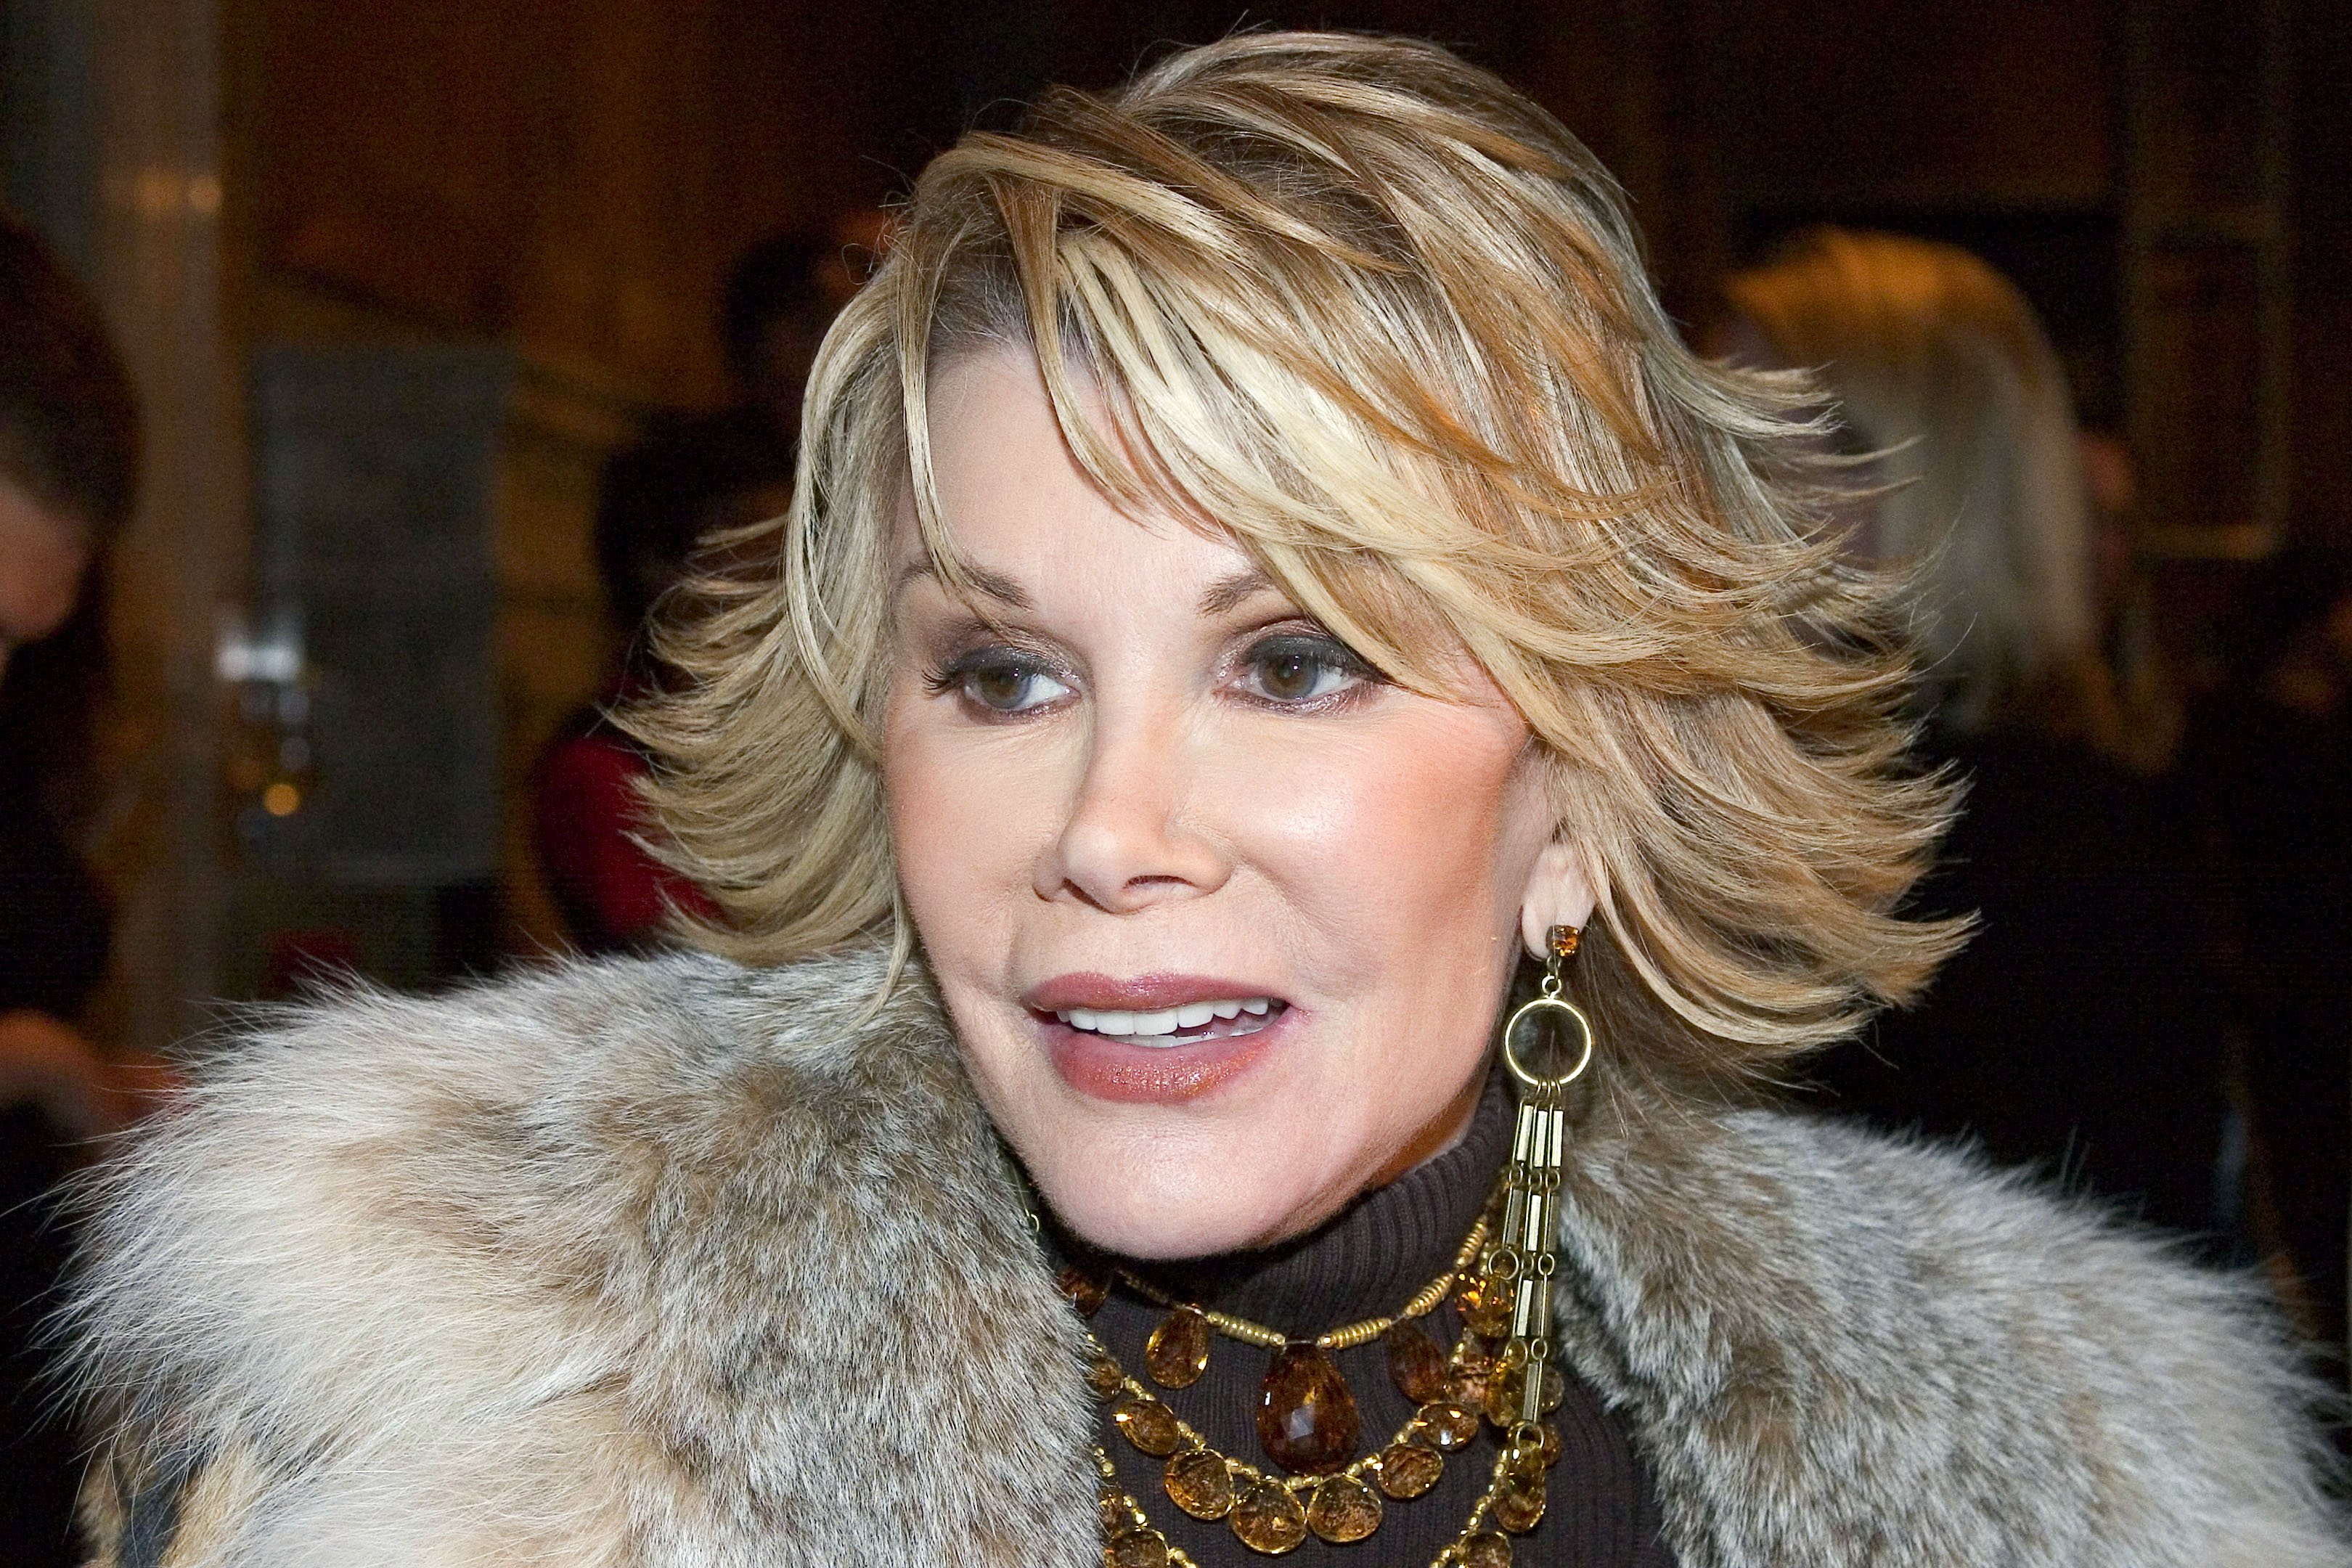 Joan Rivers attends the Banana Republic 2005 Spring Collection in New York City on October 25, 2004 | Photo: Getty Images